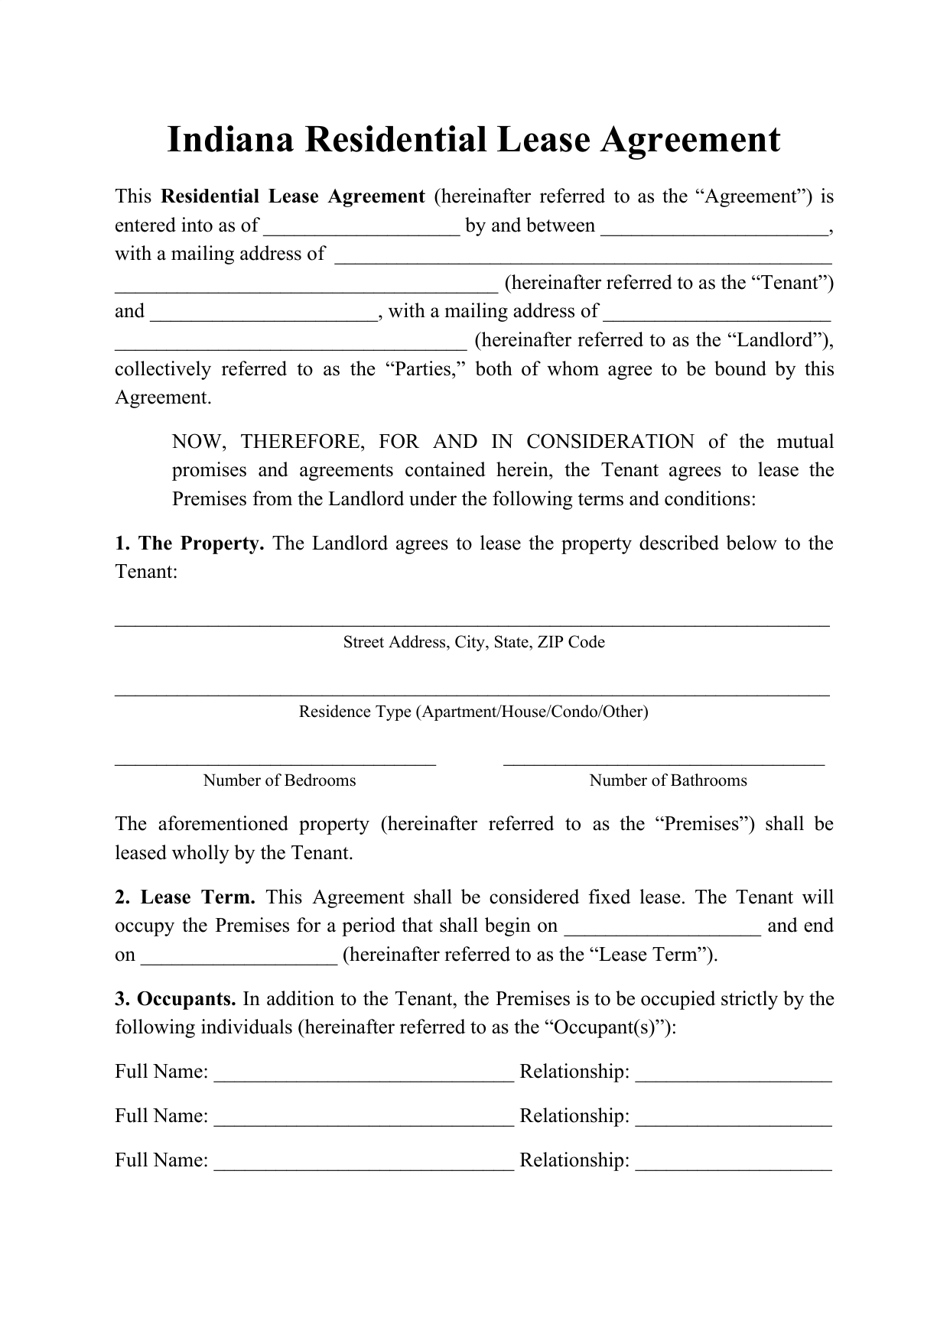 indiana-residential-lease-agreement-template-fill-out-sign-online